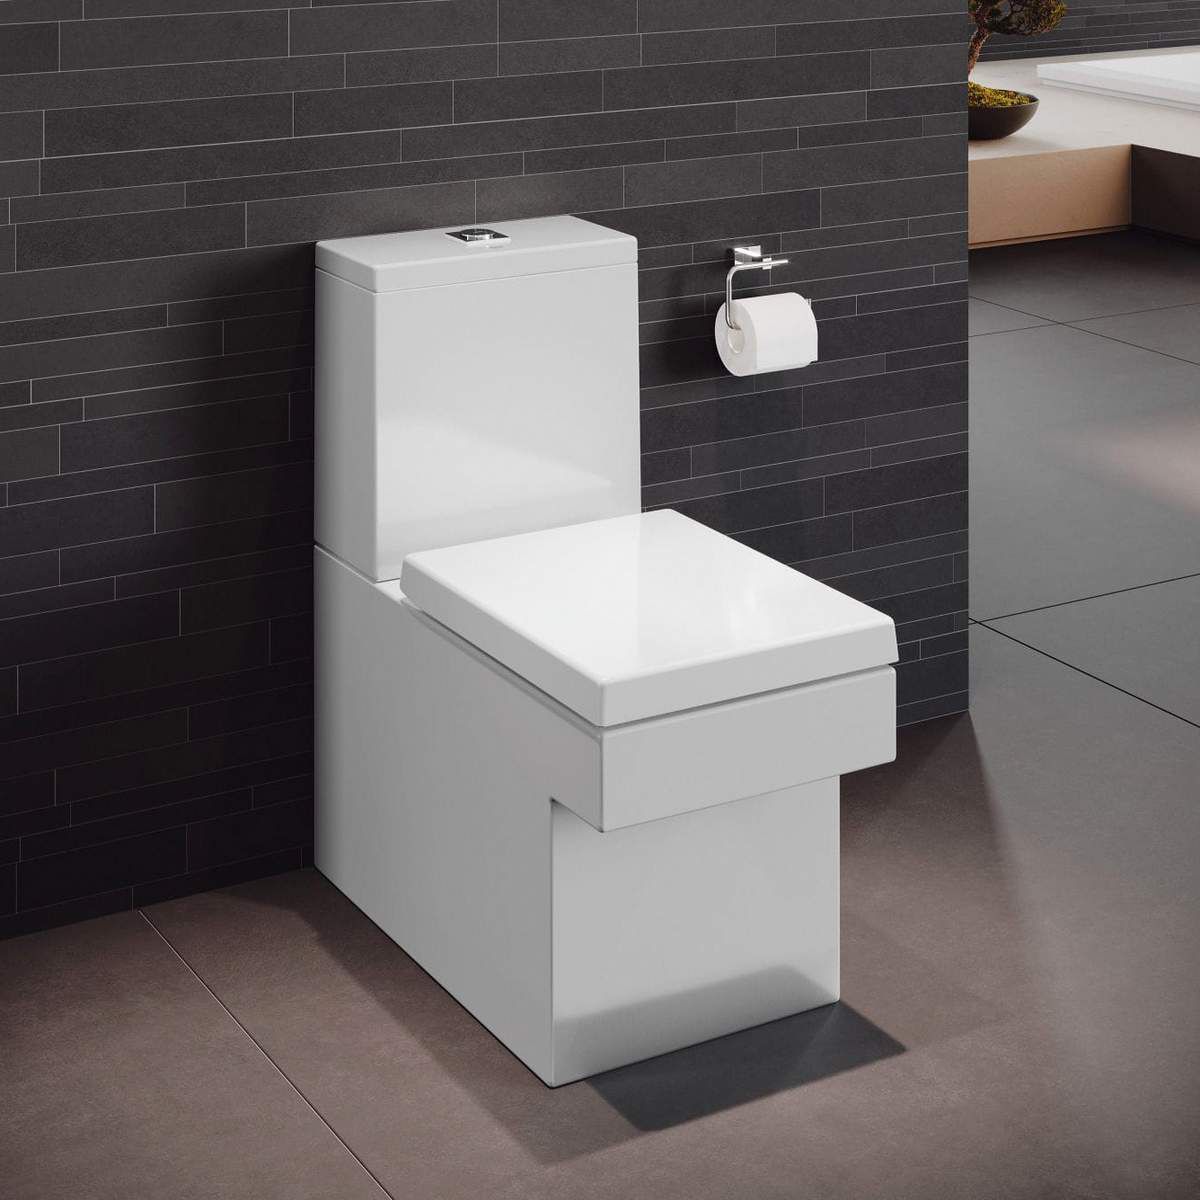 image example of a close coupled toilet